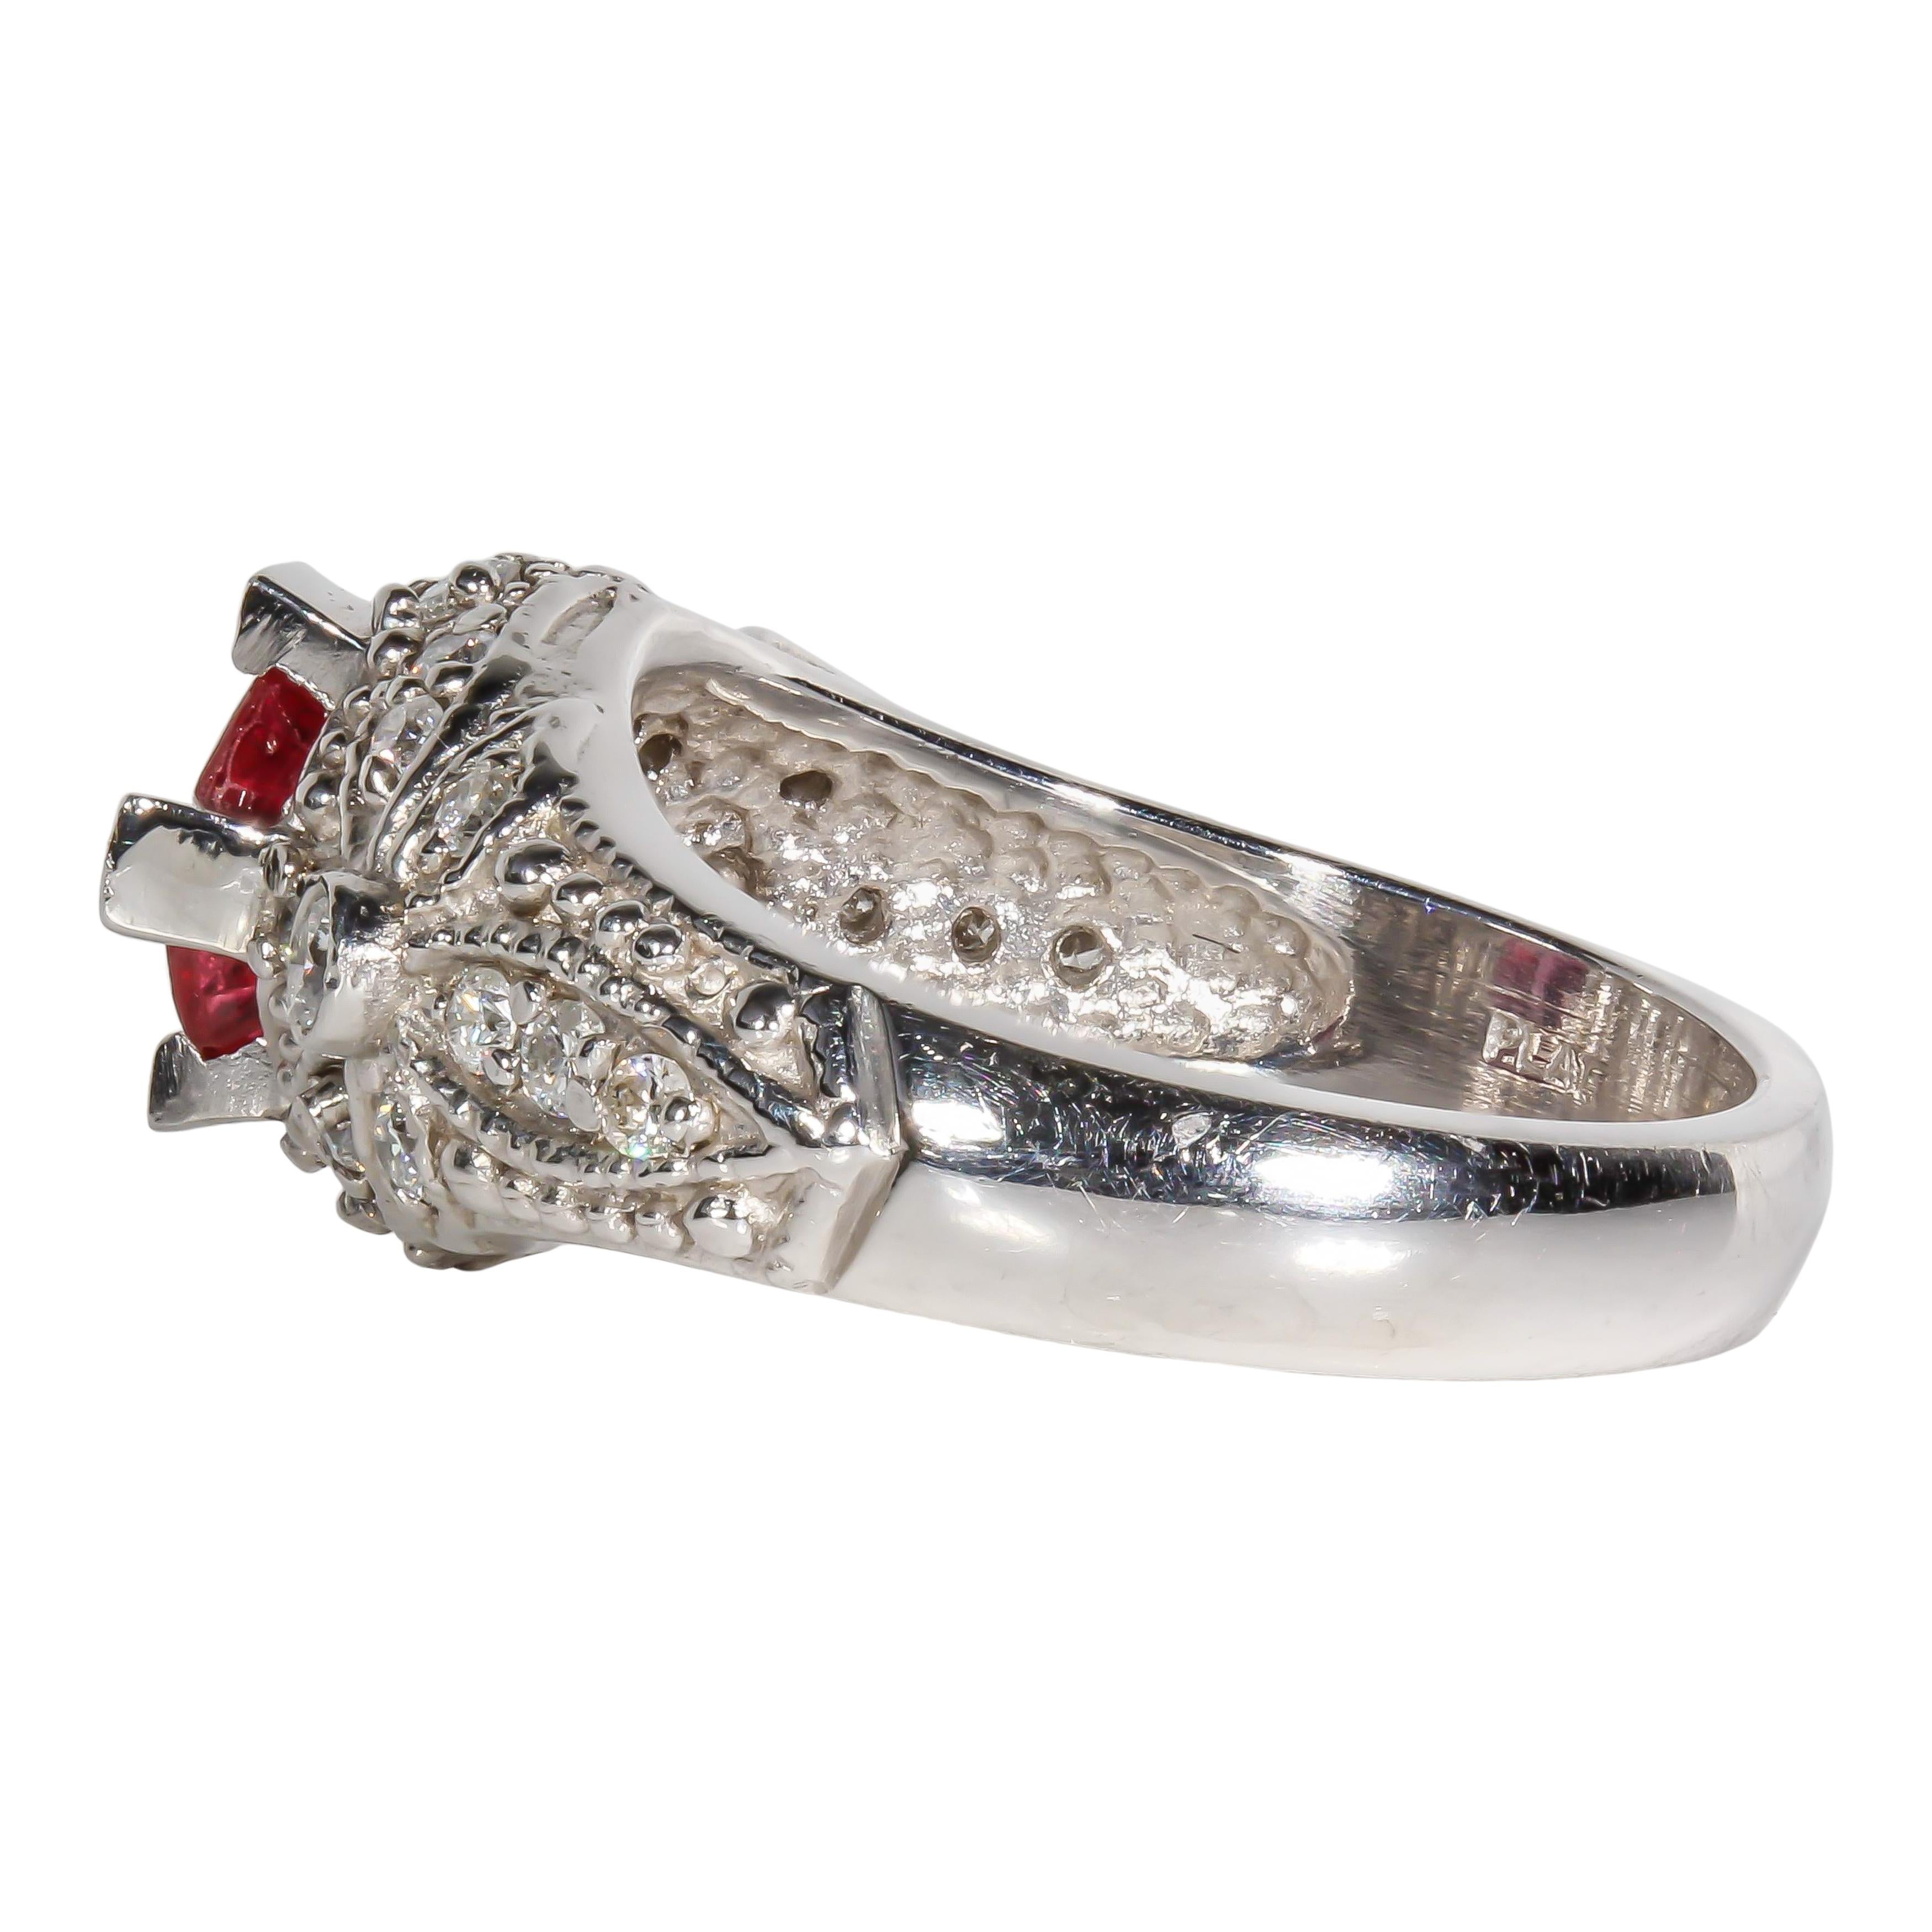 Women's 1.06 Carat Ruby and Diamond Cocktail Ring